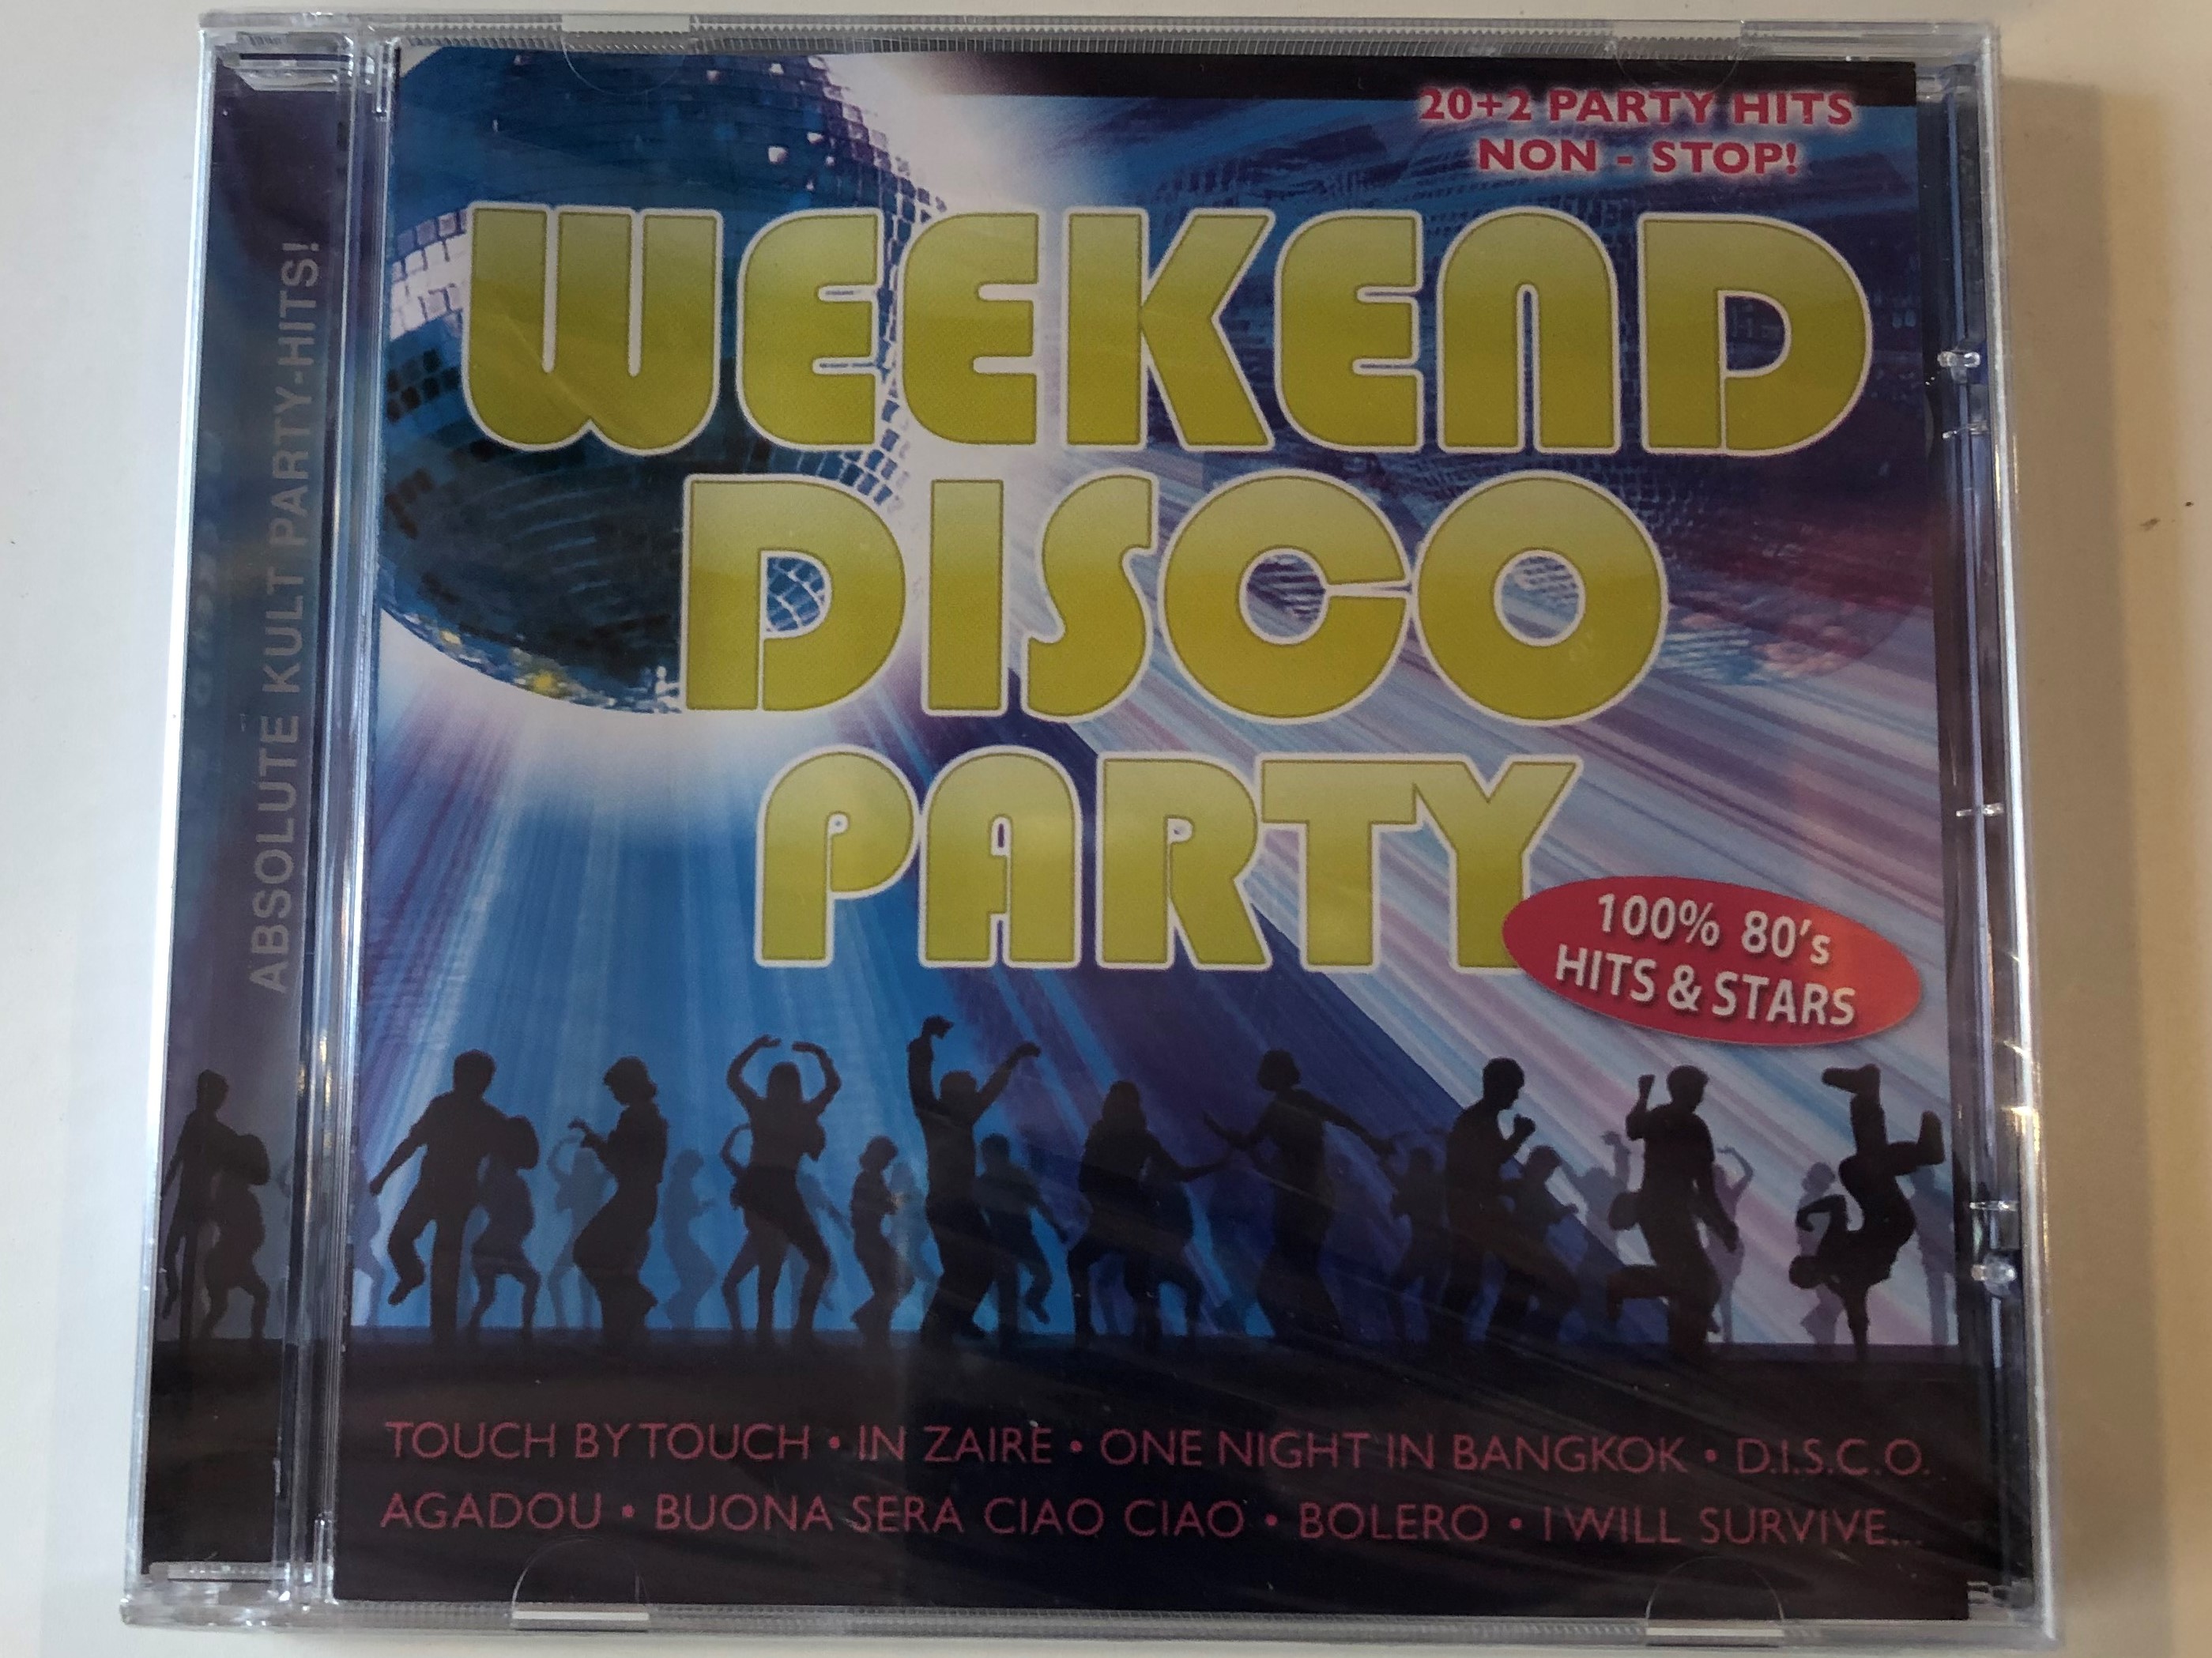 weekend-disco-party-100-80-s-hits-stars-touch-by-touch-in-zaire-one-night-in-bangkok-d.i.s.c.o.-agadou-buona-sera-ciao-ciao-bolero-i-will-survive...-hargent-media-audio-cd-402845100-1-.jpg